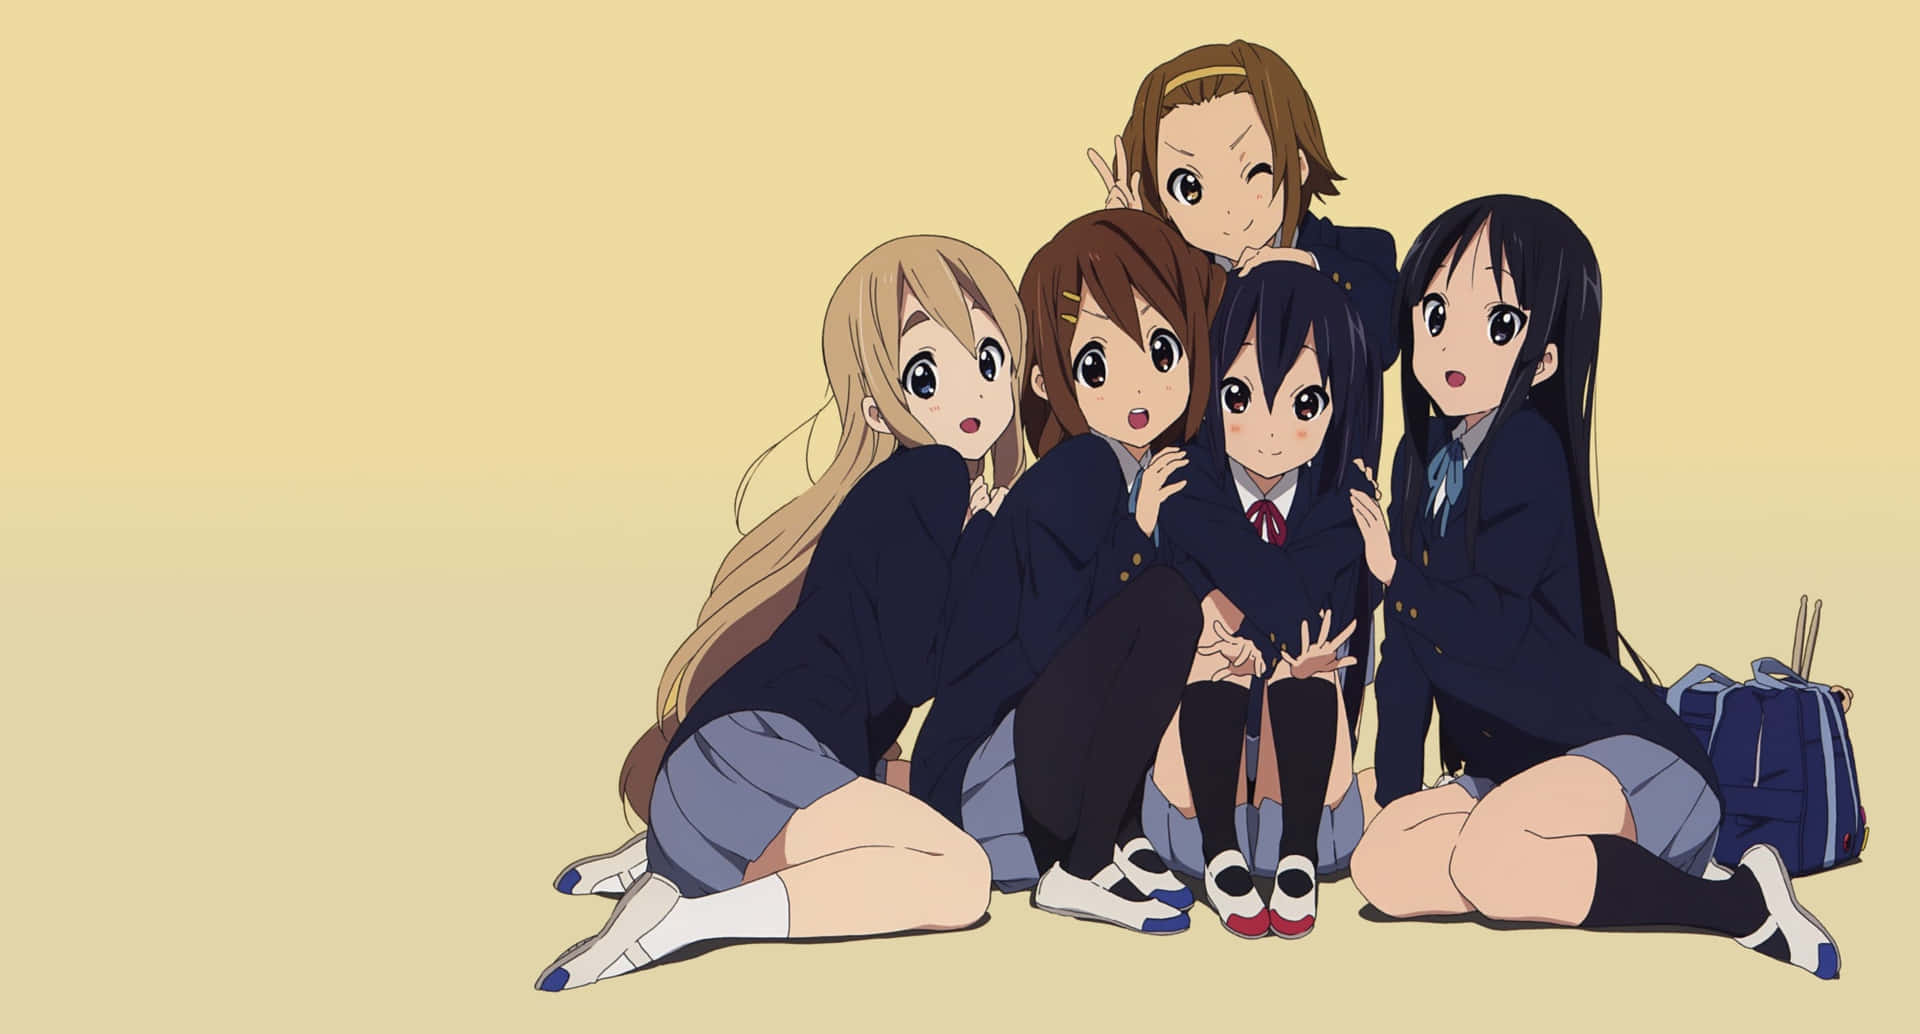 Friends 4 ever  anime BFF Wallpapers and Images  Desktop Nexus Groups